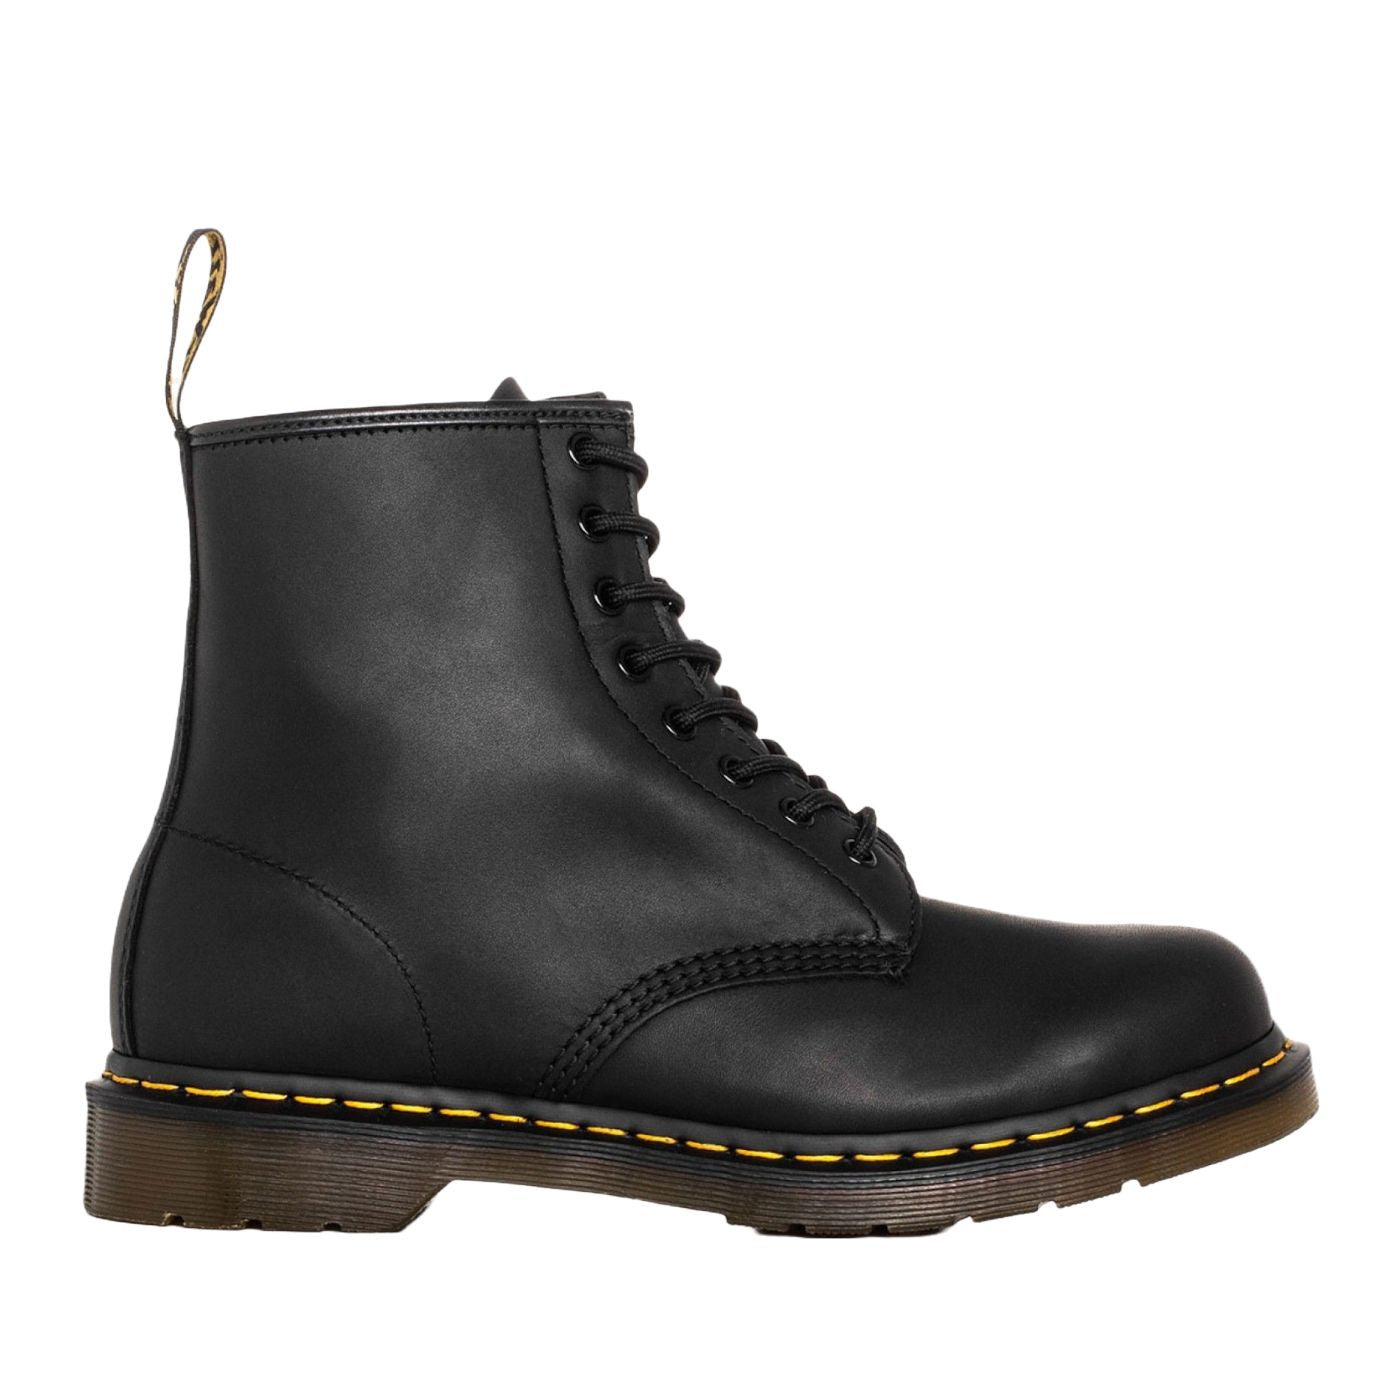 Boot 1460 Greasy Dr. martens